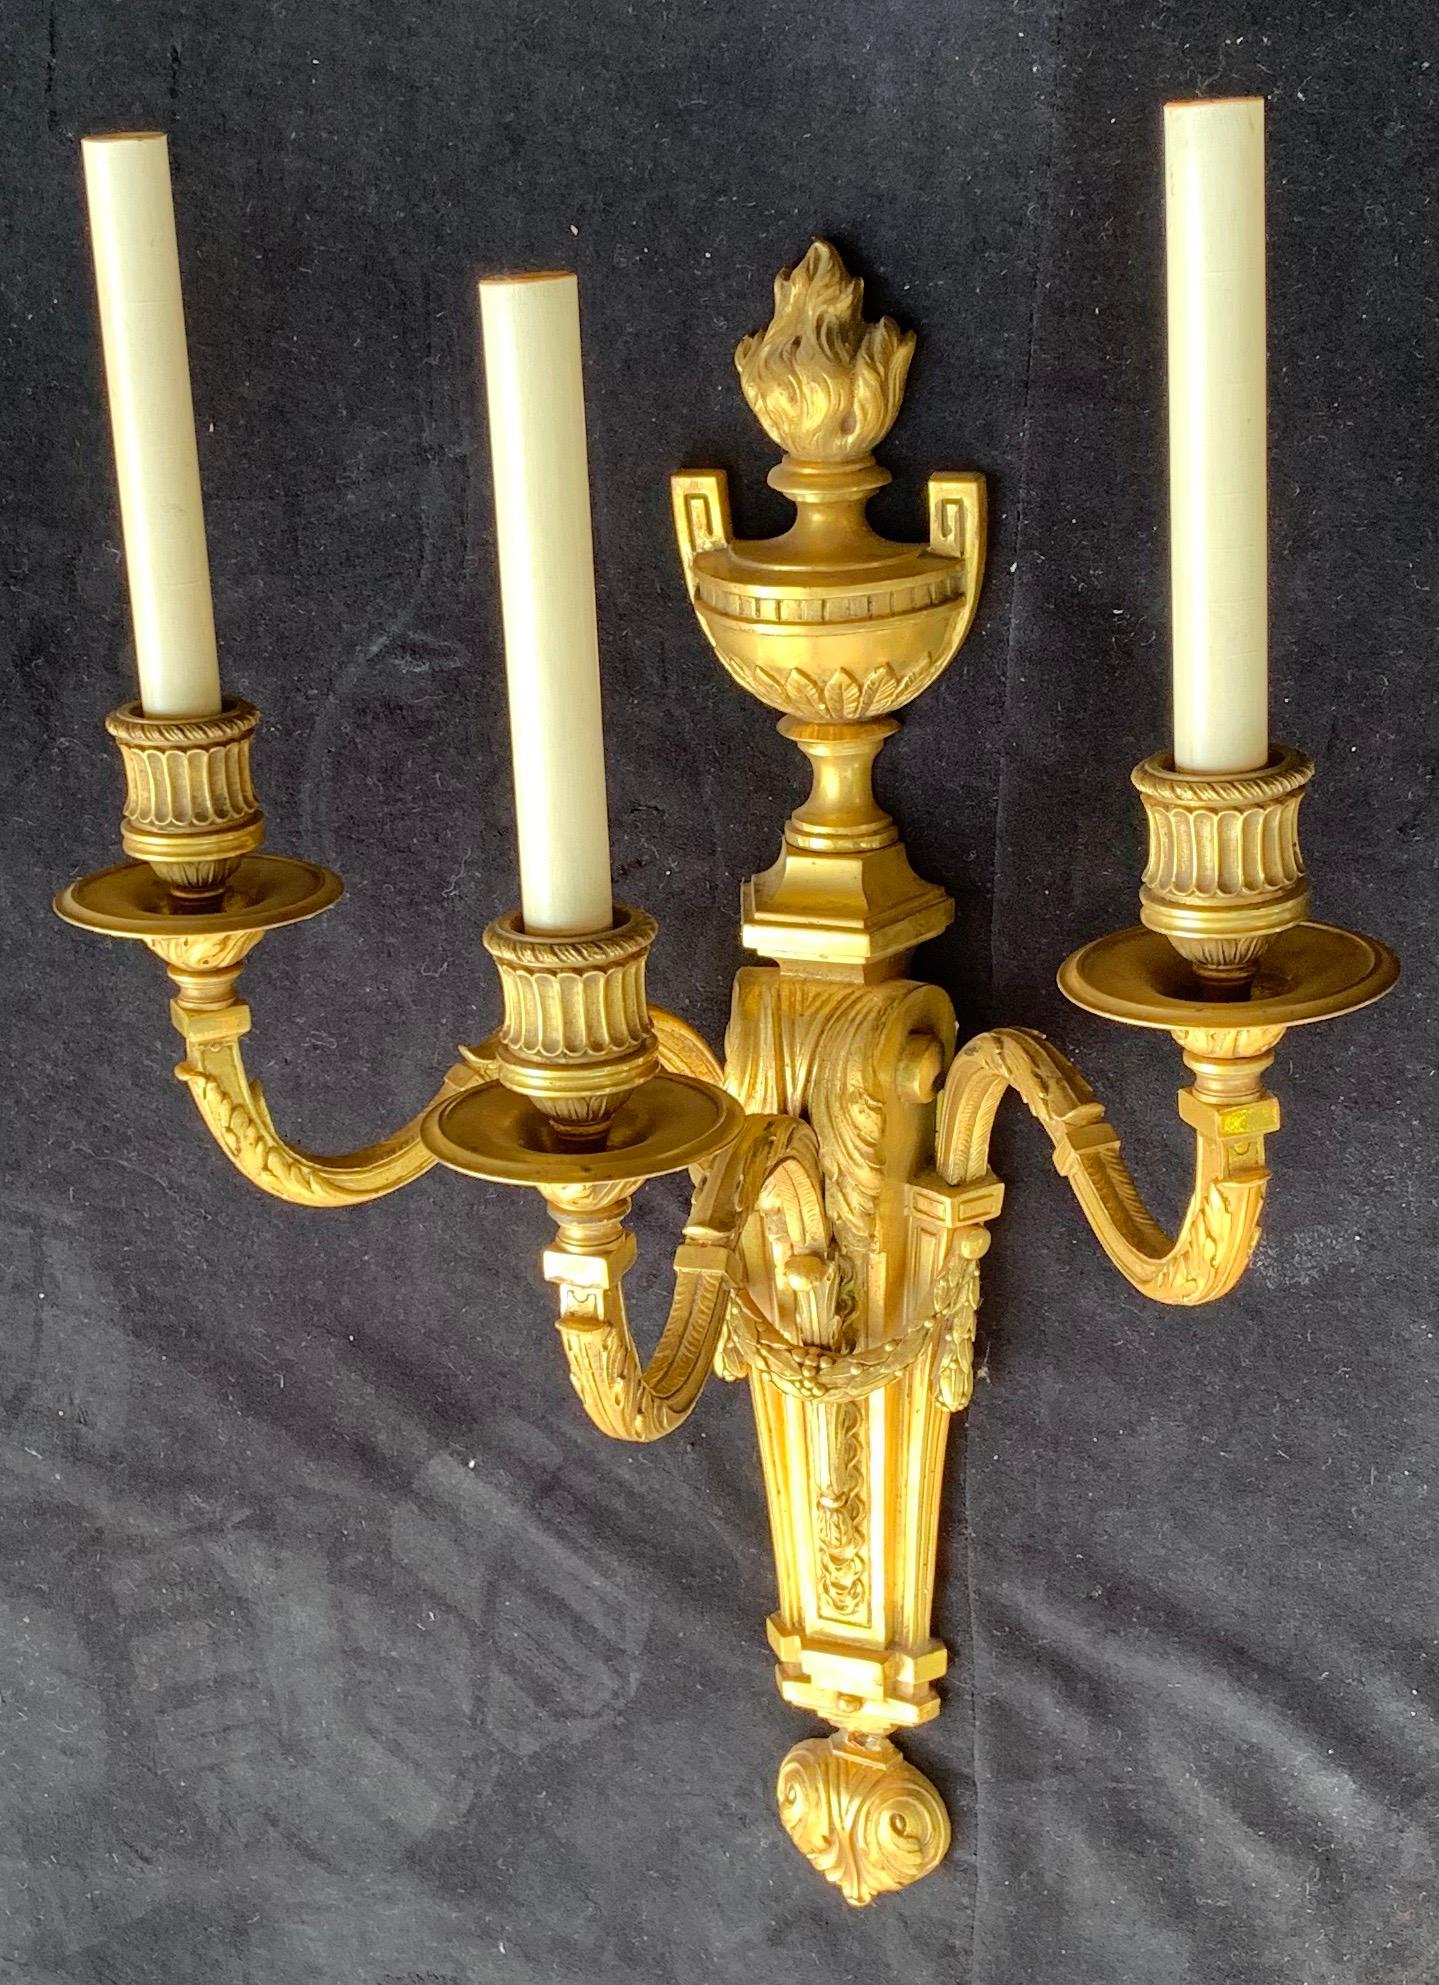 Wonderful Large Pair of French Urn Garland Neoclassical Bronze Caldwell Sconces (Vergoldet)